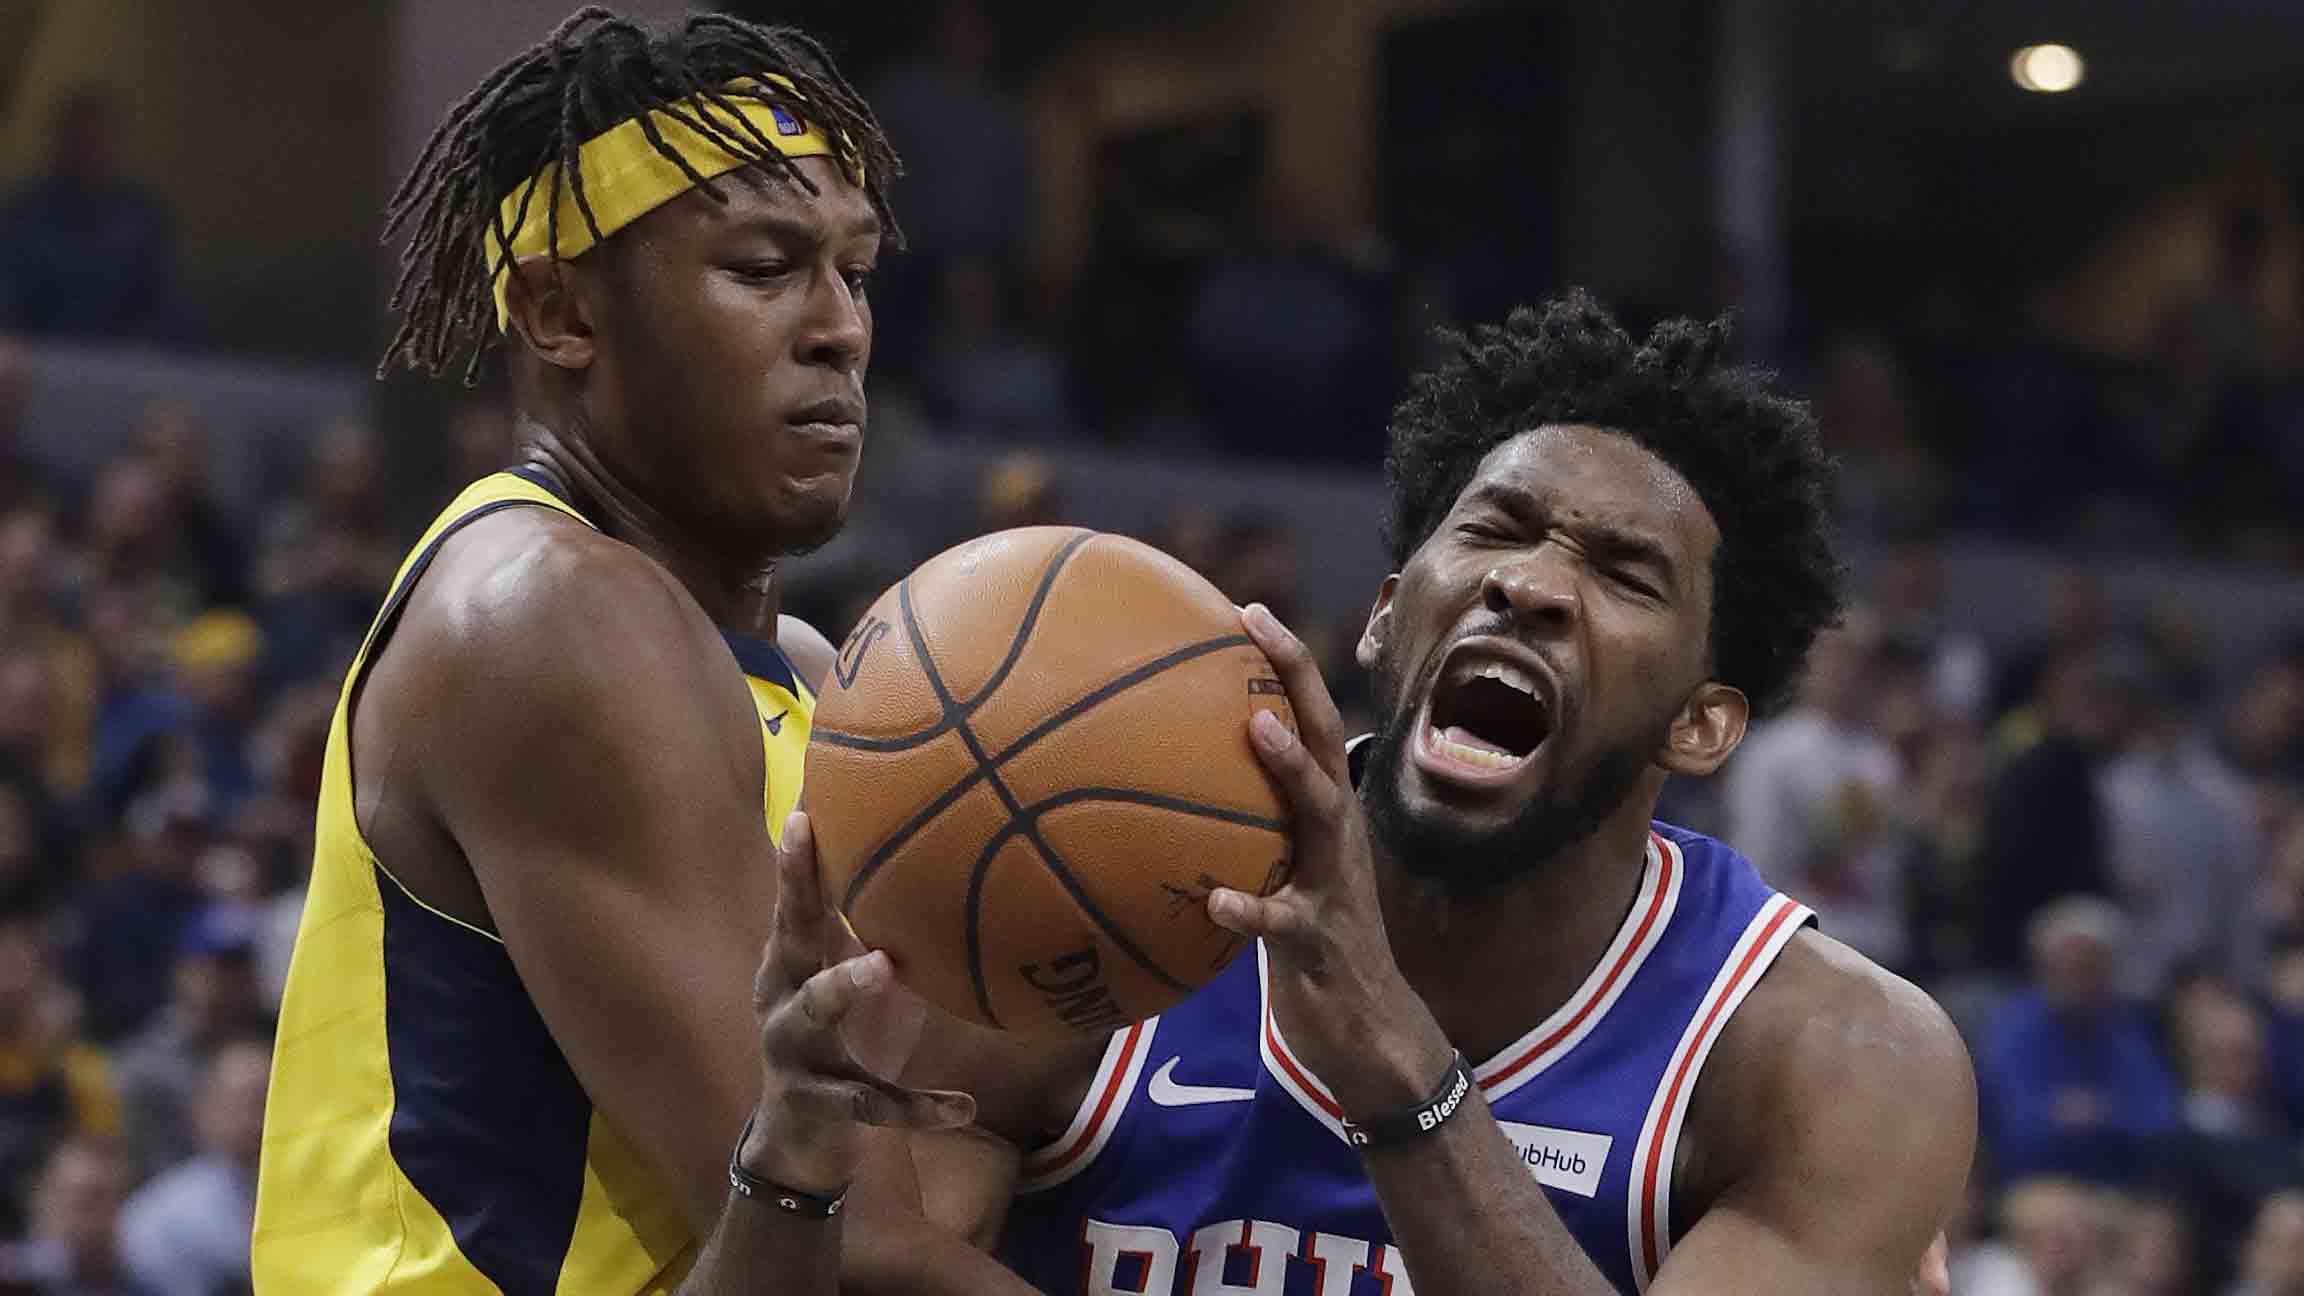 76ers pull away late as Pacers lose 100-94